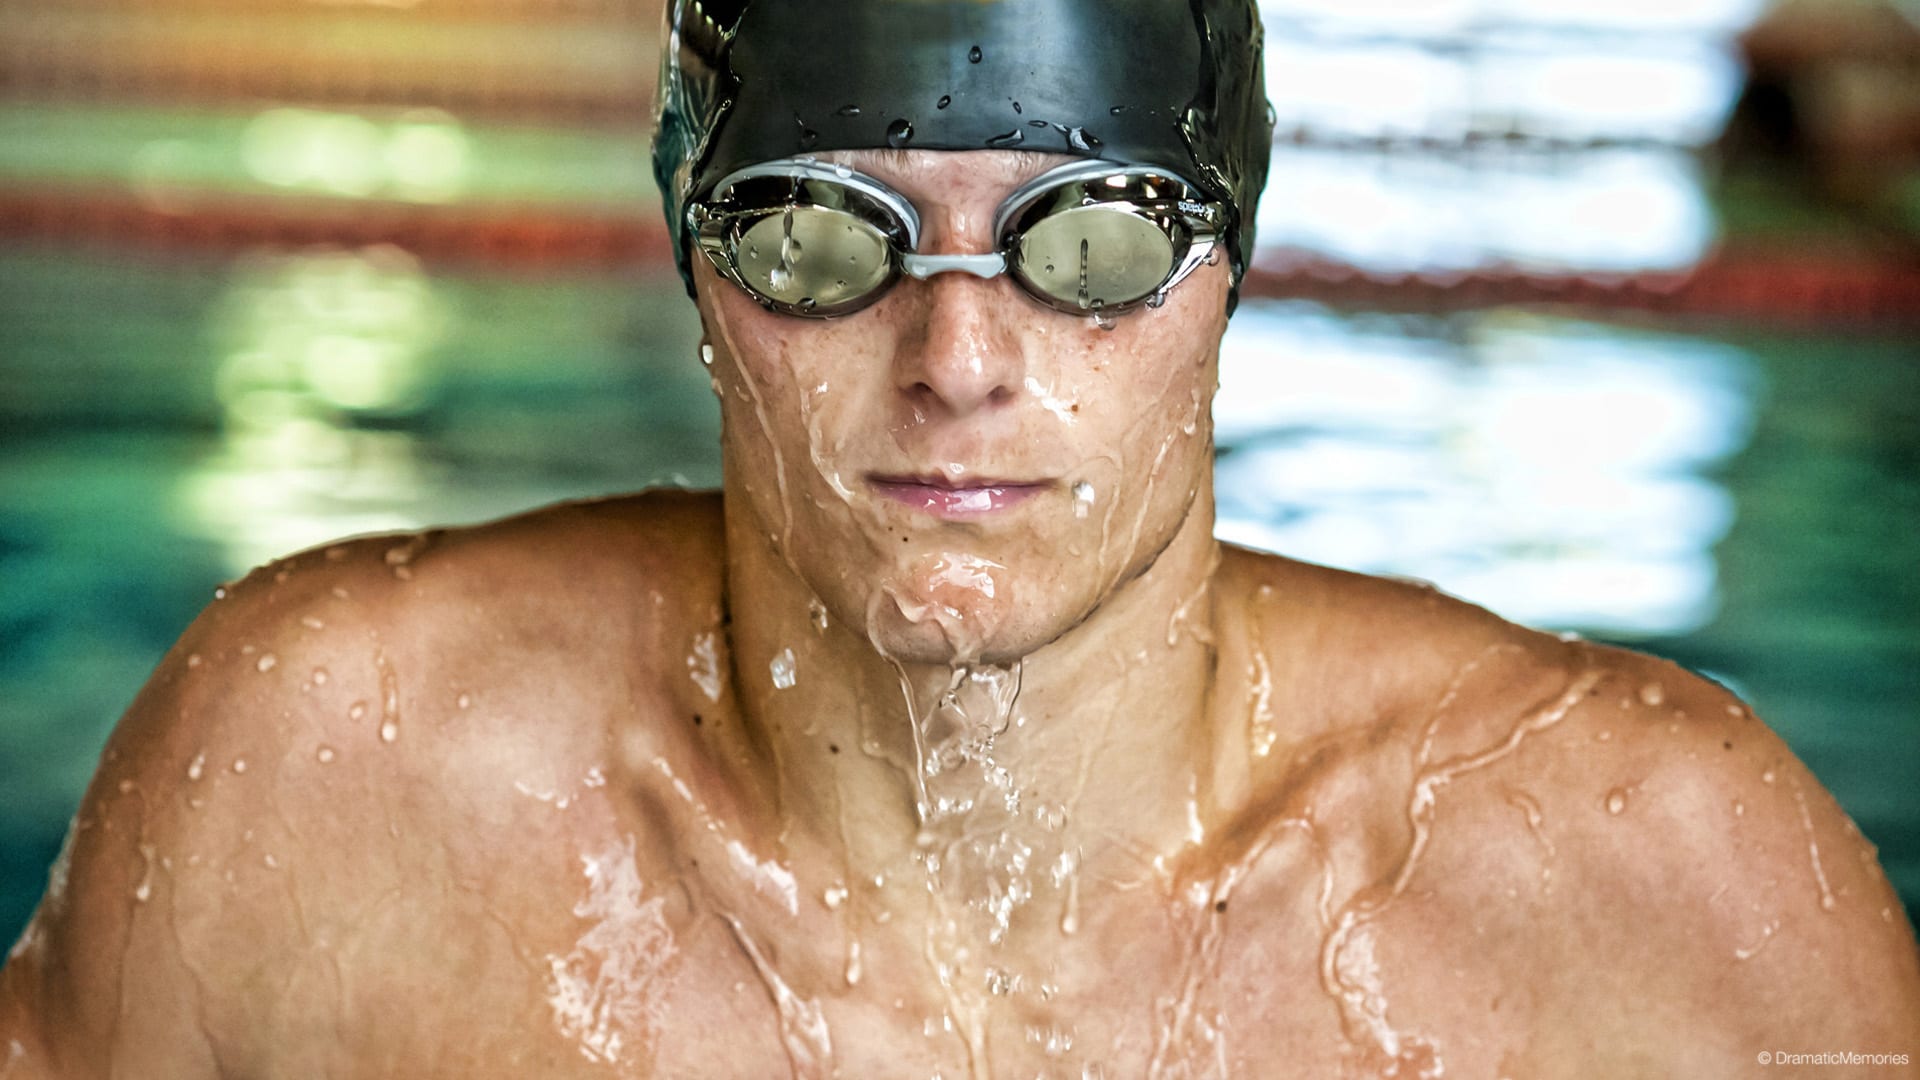 swimmer in goggles coming out of water